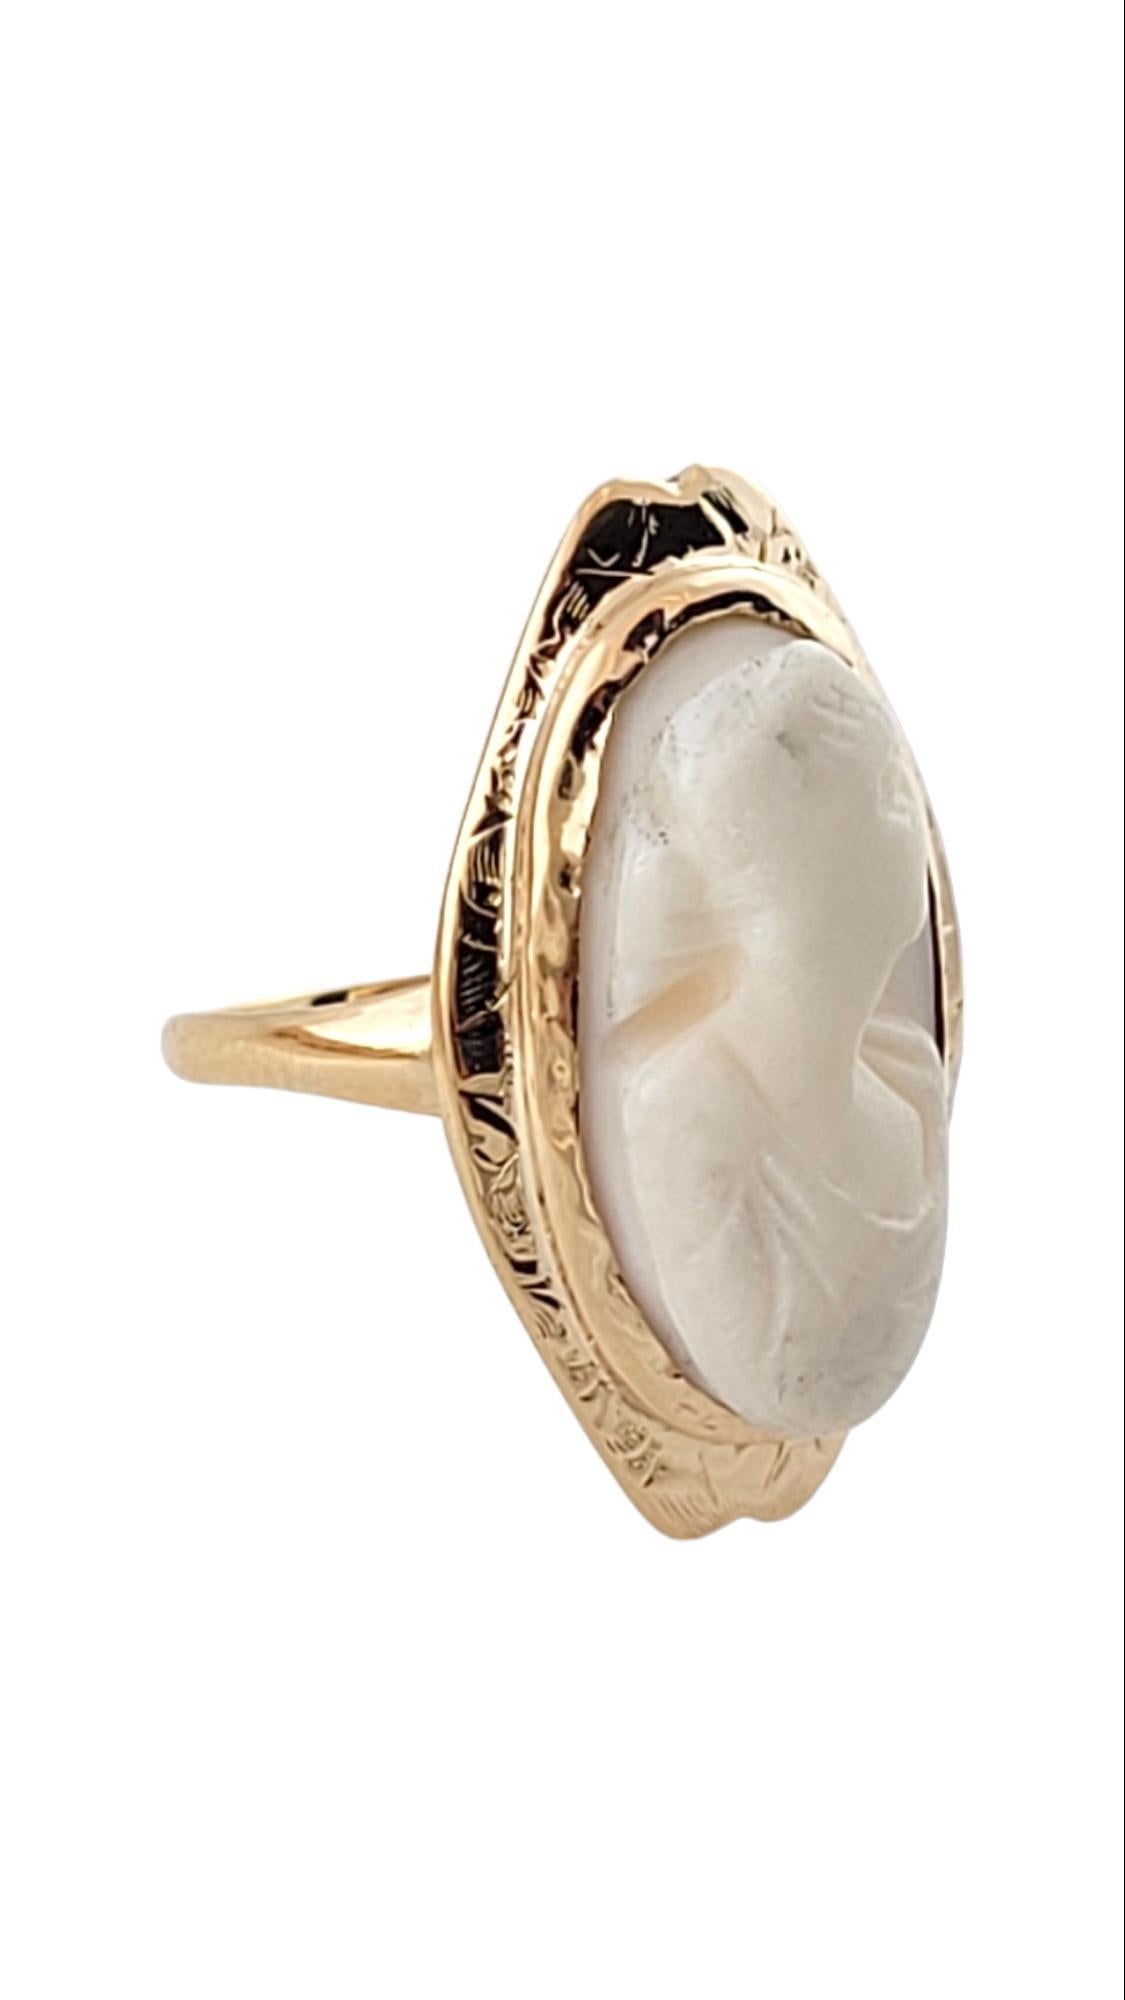 Vintage 14K Yellow Gold Cameo Ring Size 3.74

Gorgeous cameo ring crafted from 14K yellow gold for a beautiful finish!

Ring size: 3.75
Shank: 1.7mm
Size: 23.8mm X 13.6mm X 6.4mm

Weight: 3.3 g/ 2.1 dwt

Hallmark: 14K

Very good condition,